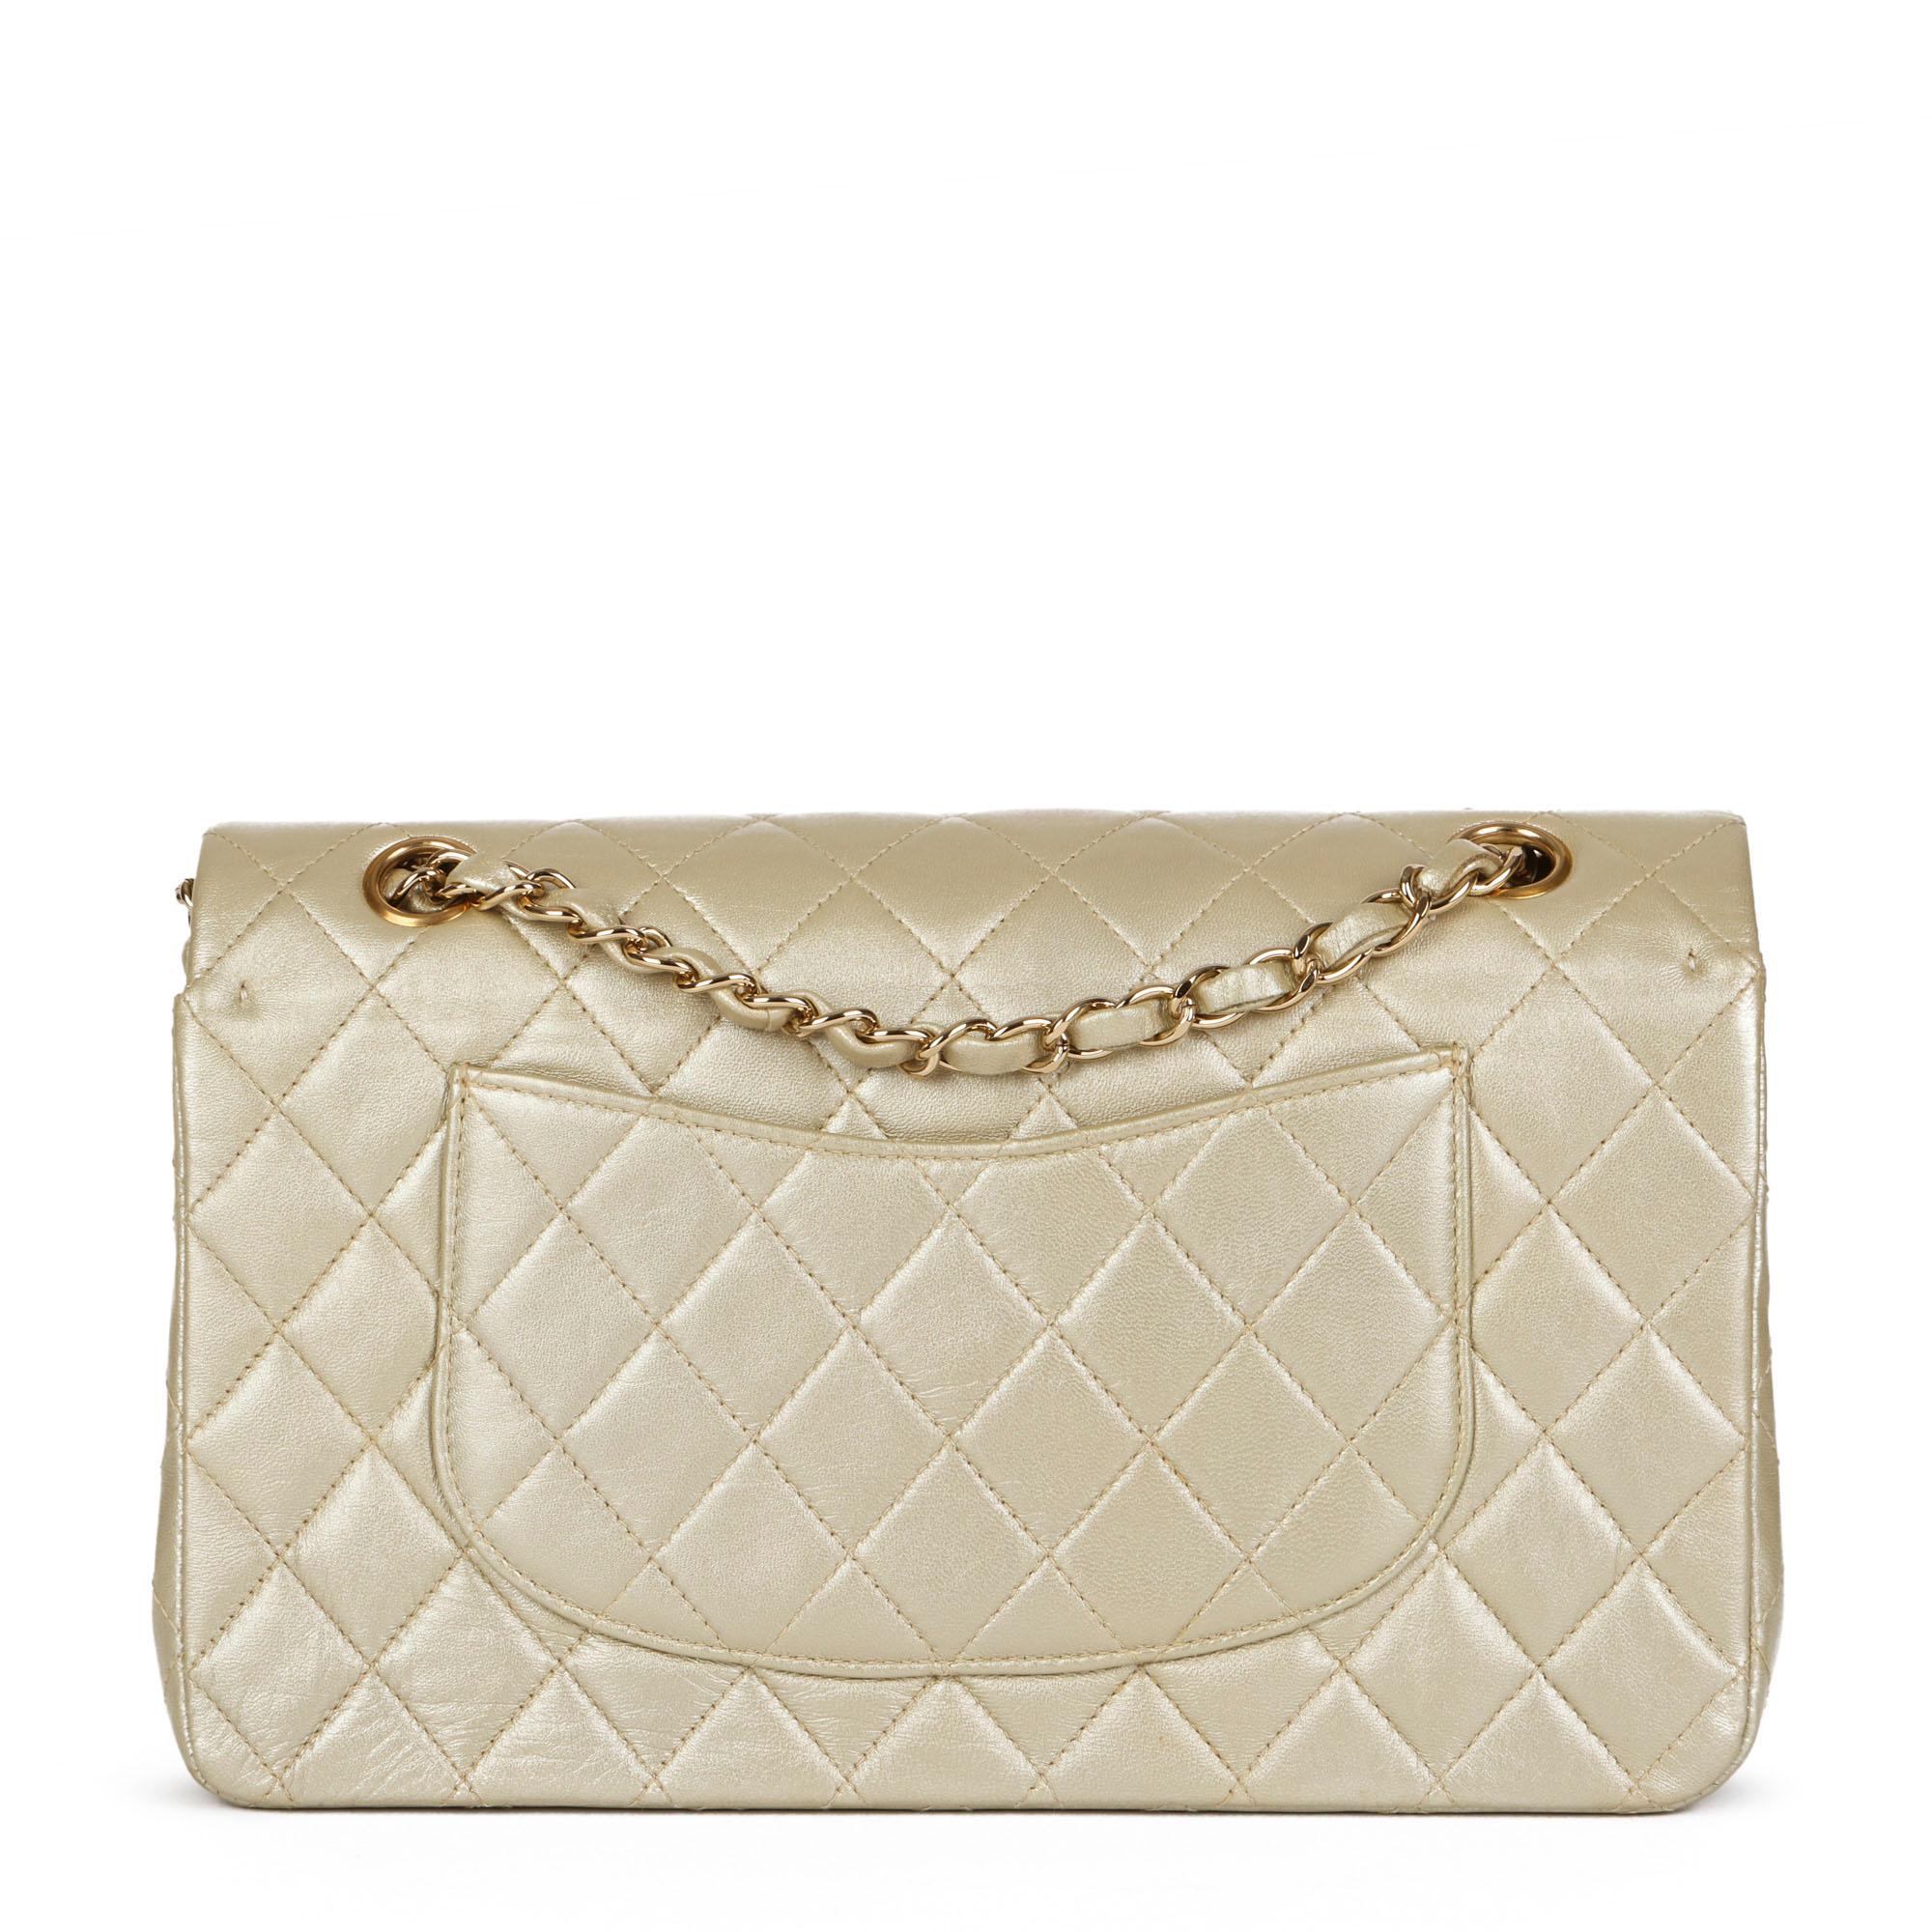 CHANEL Pearlescent Pale Green Metallic Lambskin Medium Classic Double Flap Bag In Excellent Condition In Bishop's Stortford, Hertfordshire